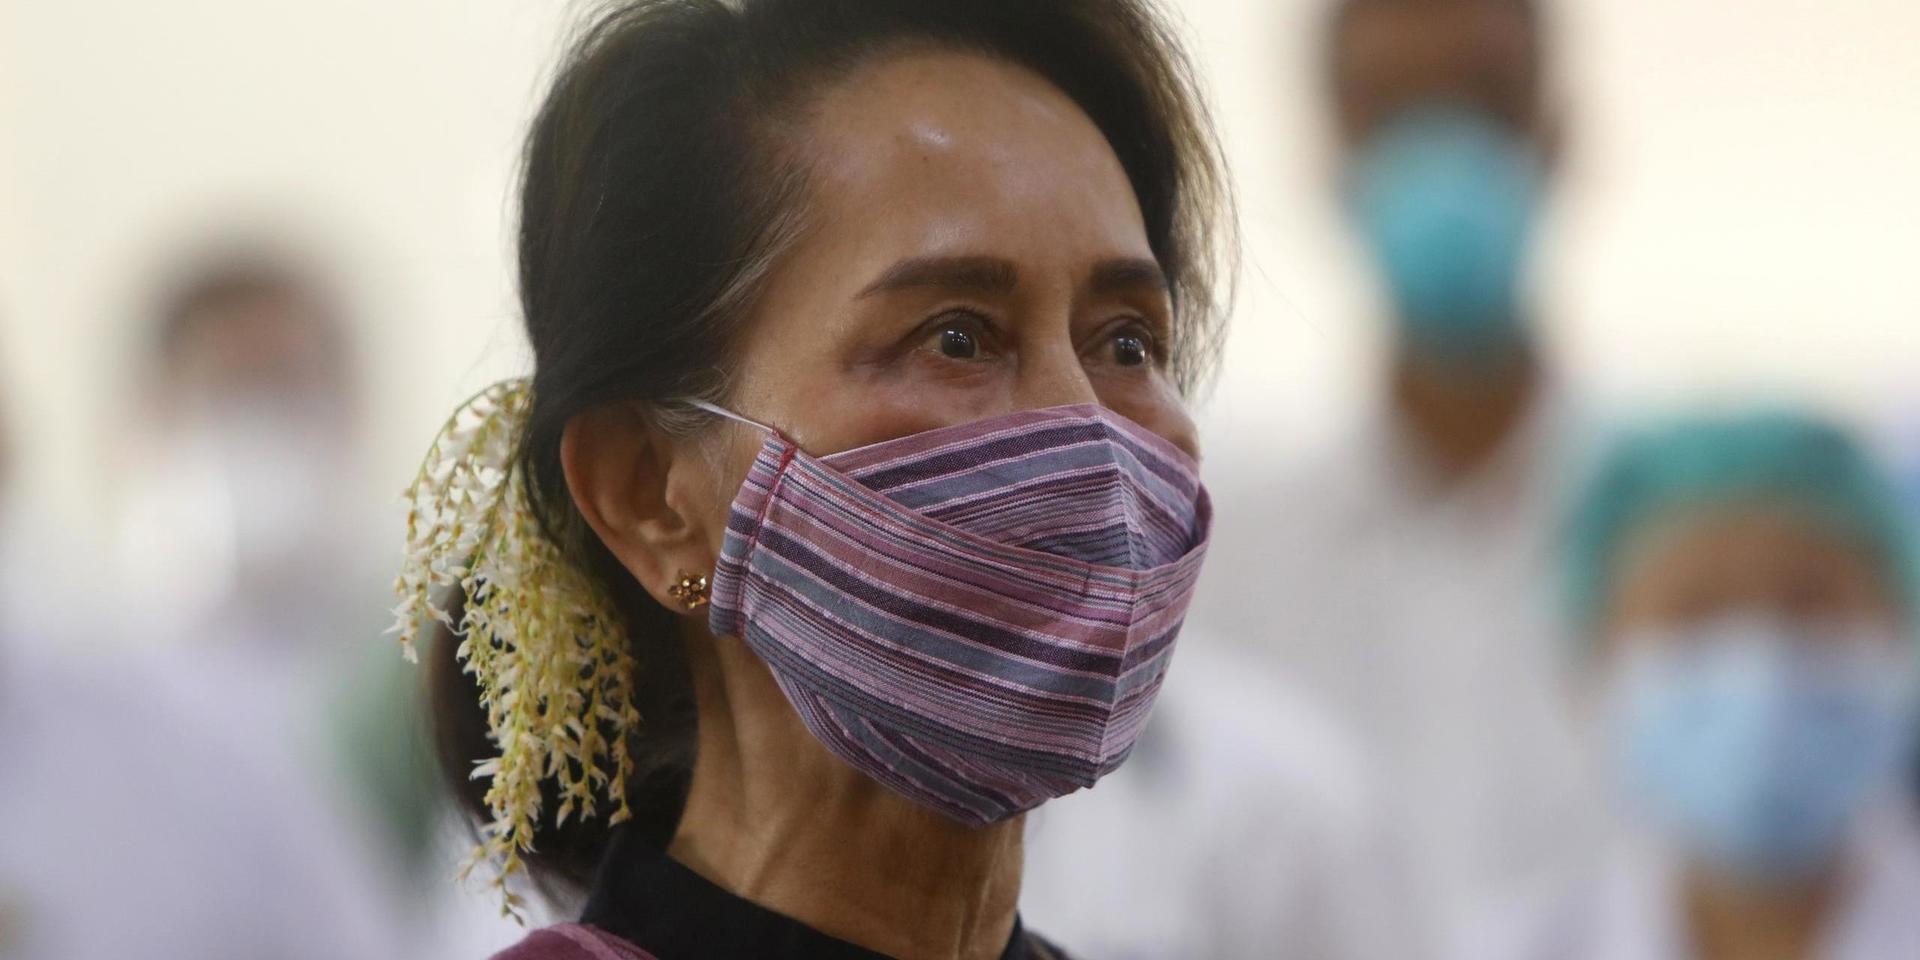 FILE - In this Jan 27, 2021, file photo, Myanmar leader Aung San Suu Kyi watches the vaccination of health workers at hospital in Naypyitaw, Myanmar. Reports says Monday, Feb. 1, 2021 a military coup has taken place in Myanmar and Suu Kyi has been detained under house arrest. (AP Photo/Aung Shine Oo, File)  XKS102